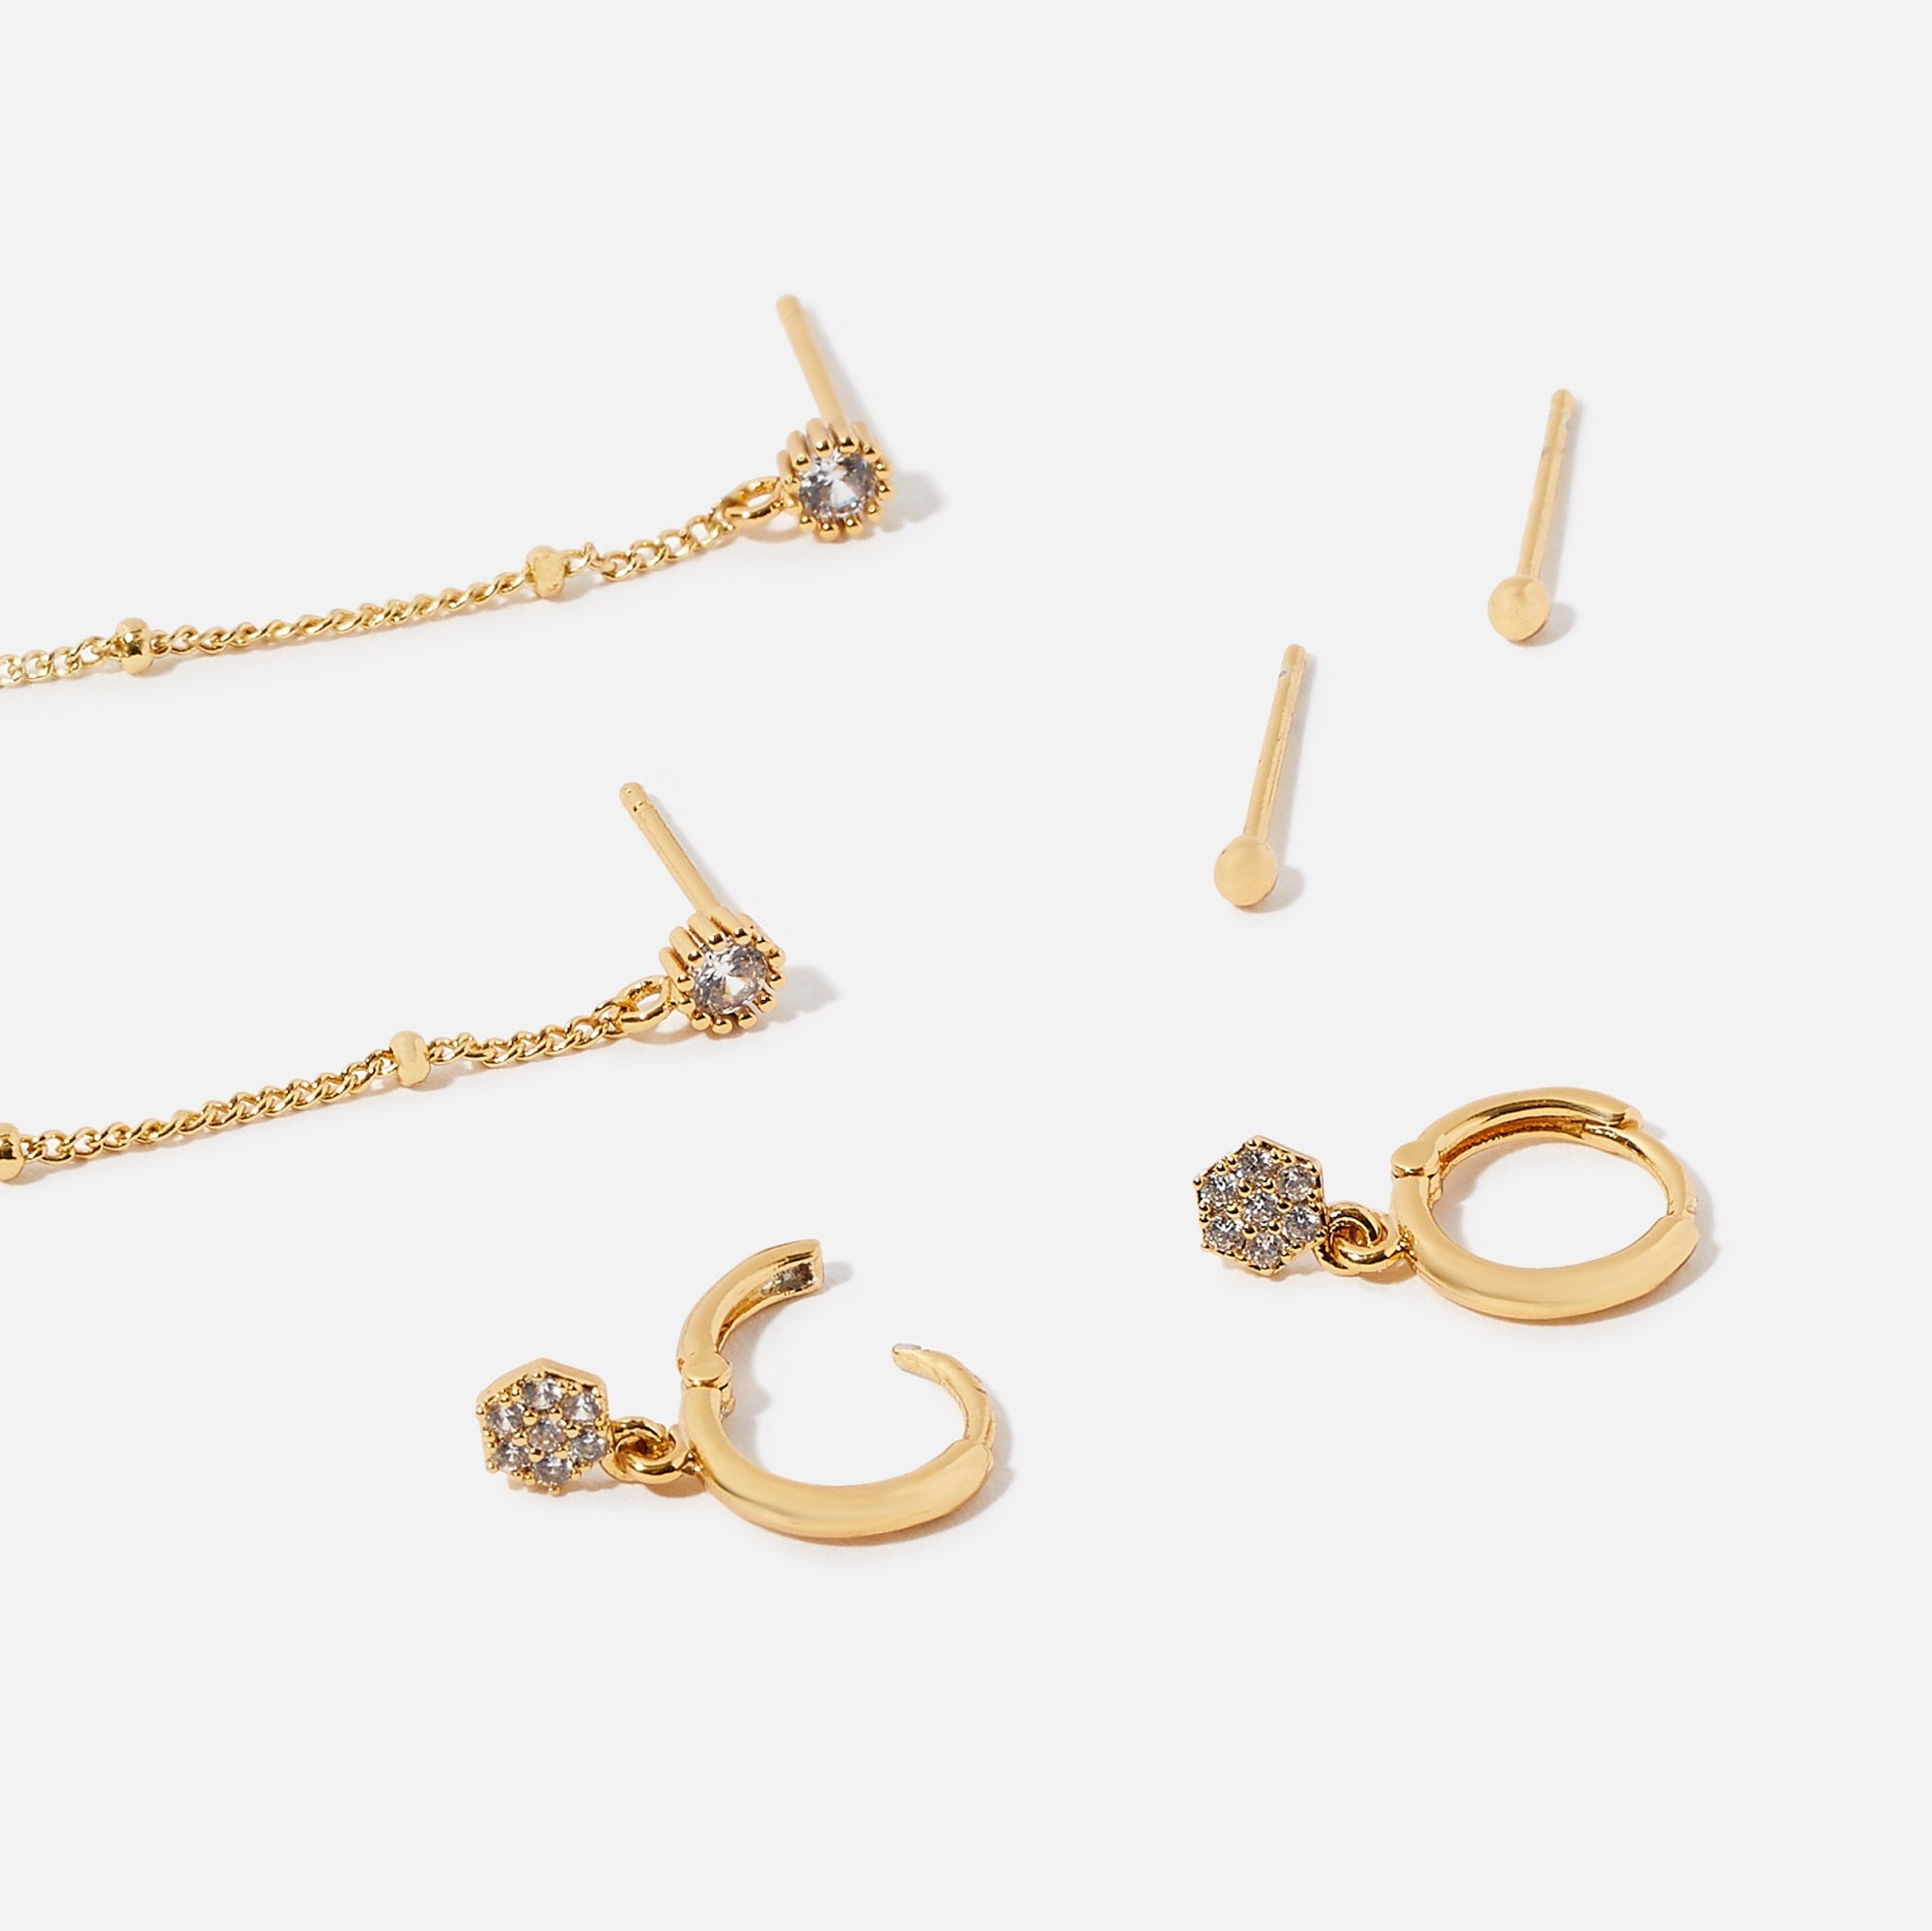 Real Gold Plated Sparkle set of 3 Drop And Hoop Earring Set For Women By Accessorize London